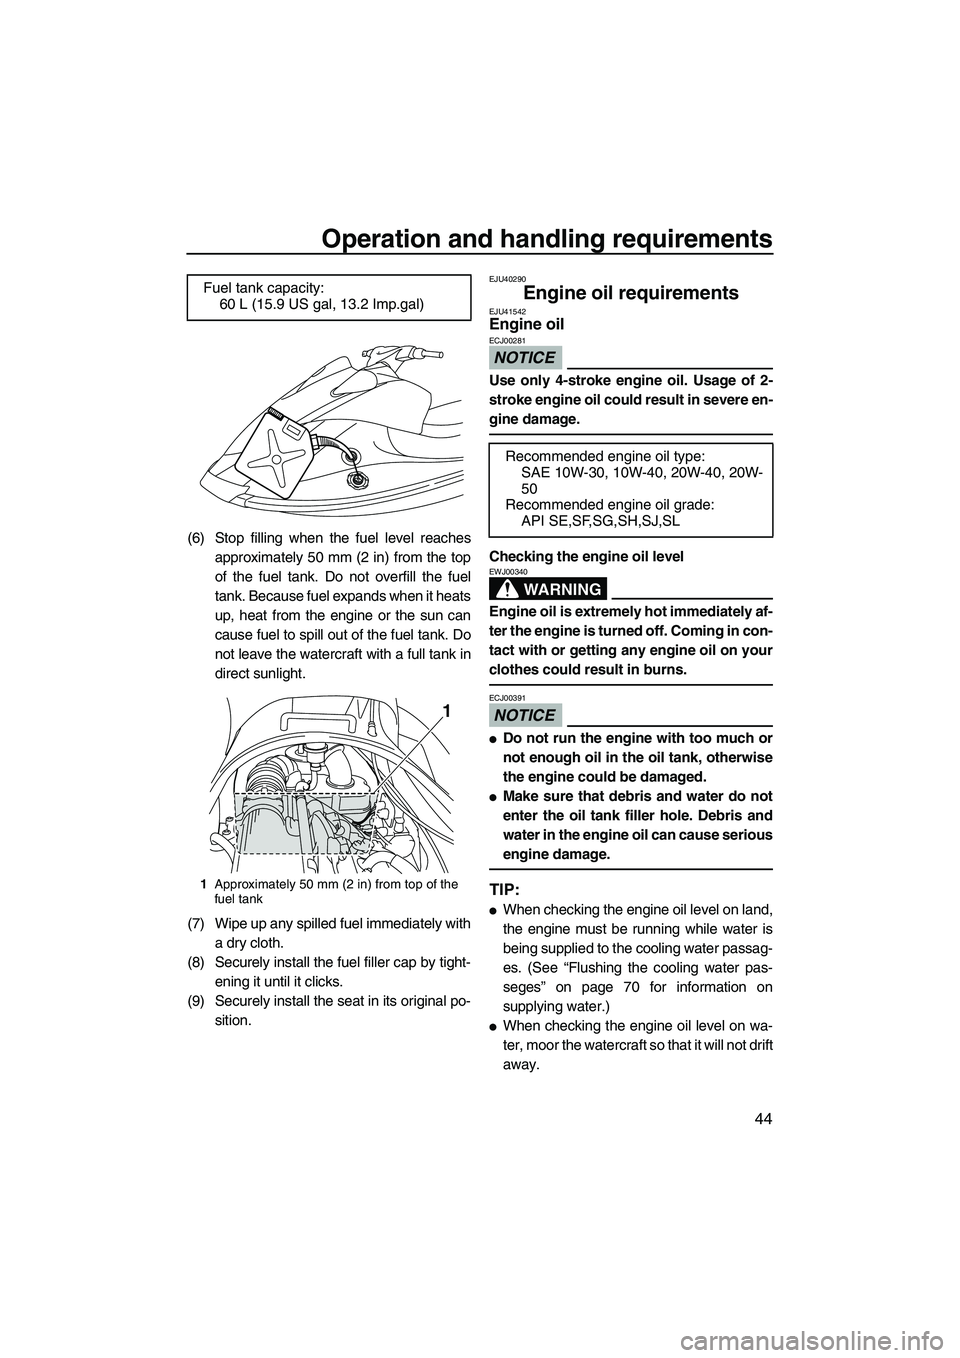 YAMAHA VX 2010  Owners Manual Operation and handling requirements
44
(6) Stop filling when the fuel level reaches
approximately 50 mm (2 in) from the top
of the fuel tank. Do not overfill the fuel
tank. Because fuel expands when i